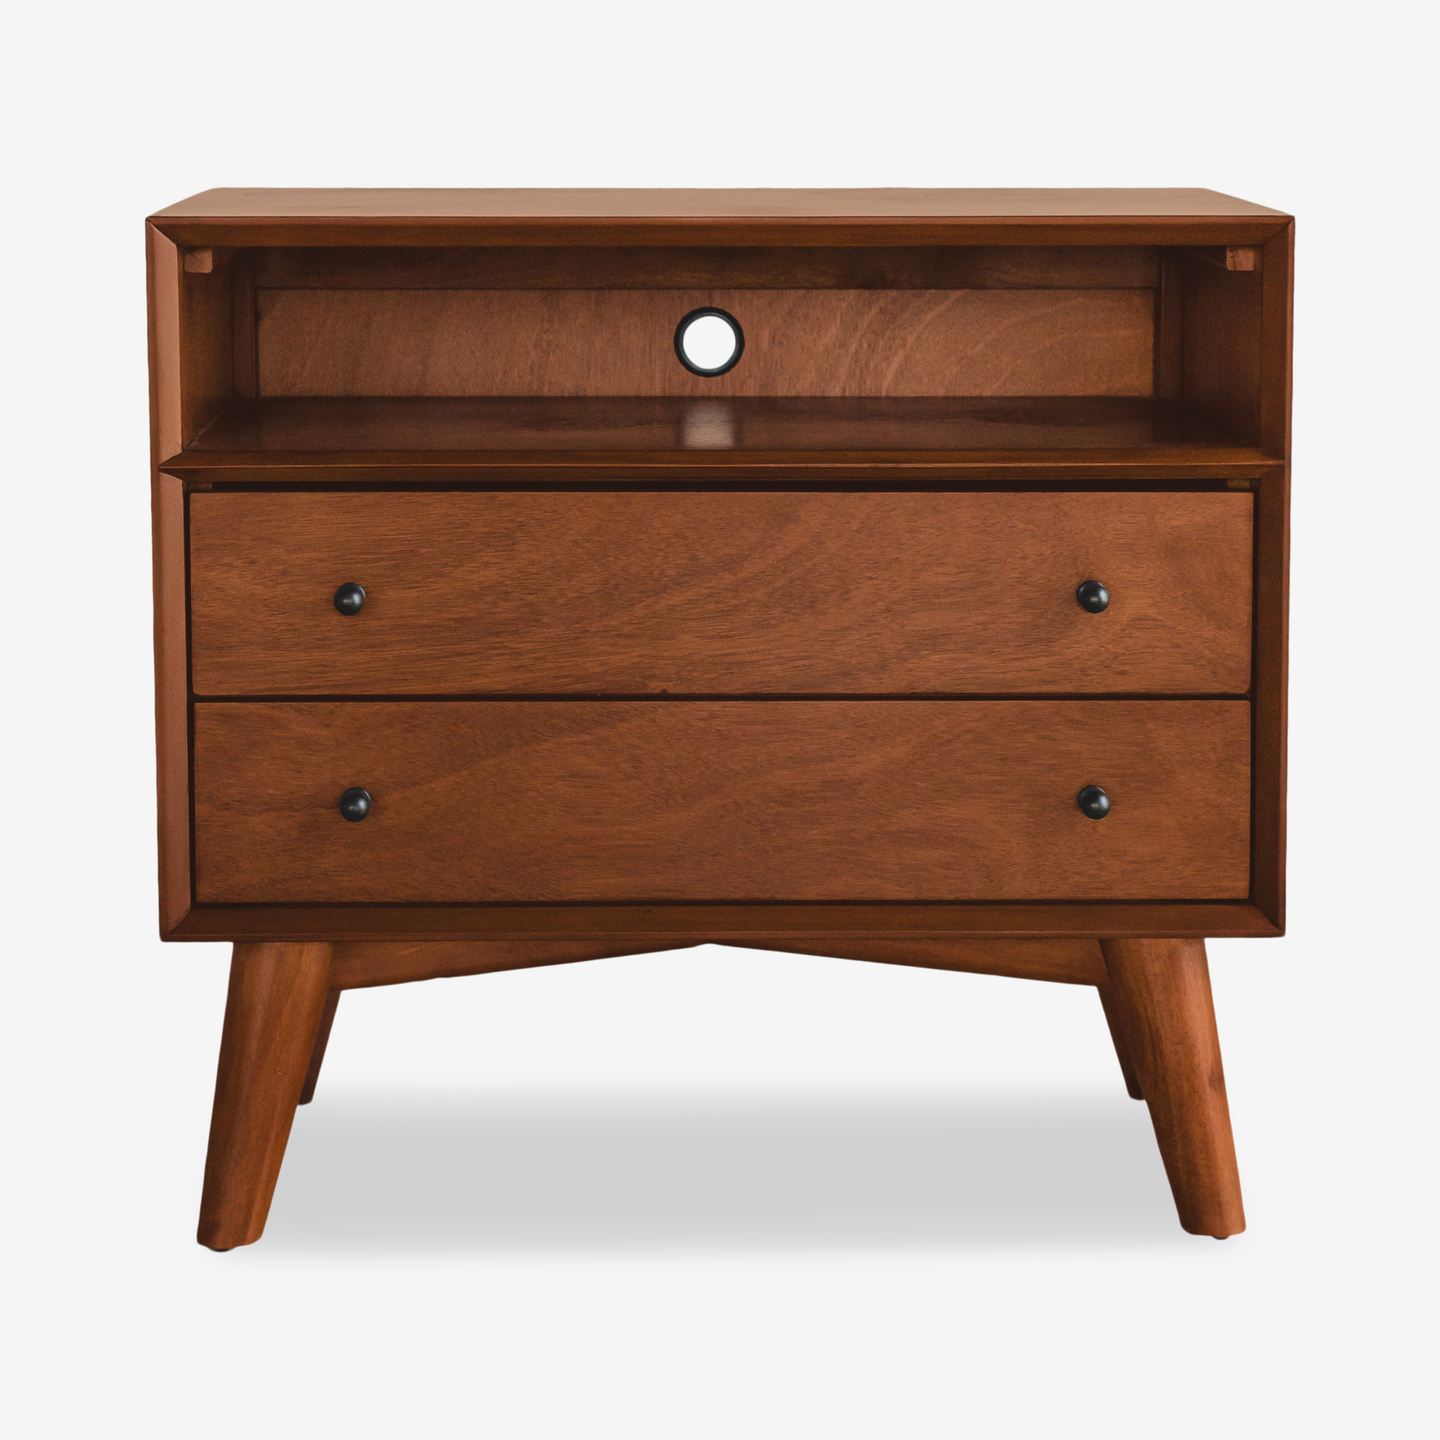 1854_Cheney-Large-Nightstand-Acorn_front